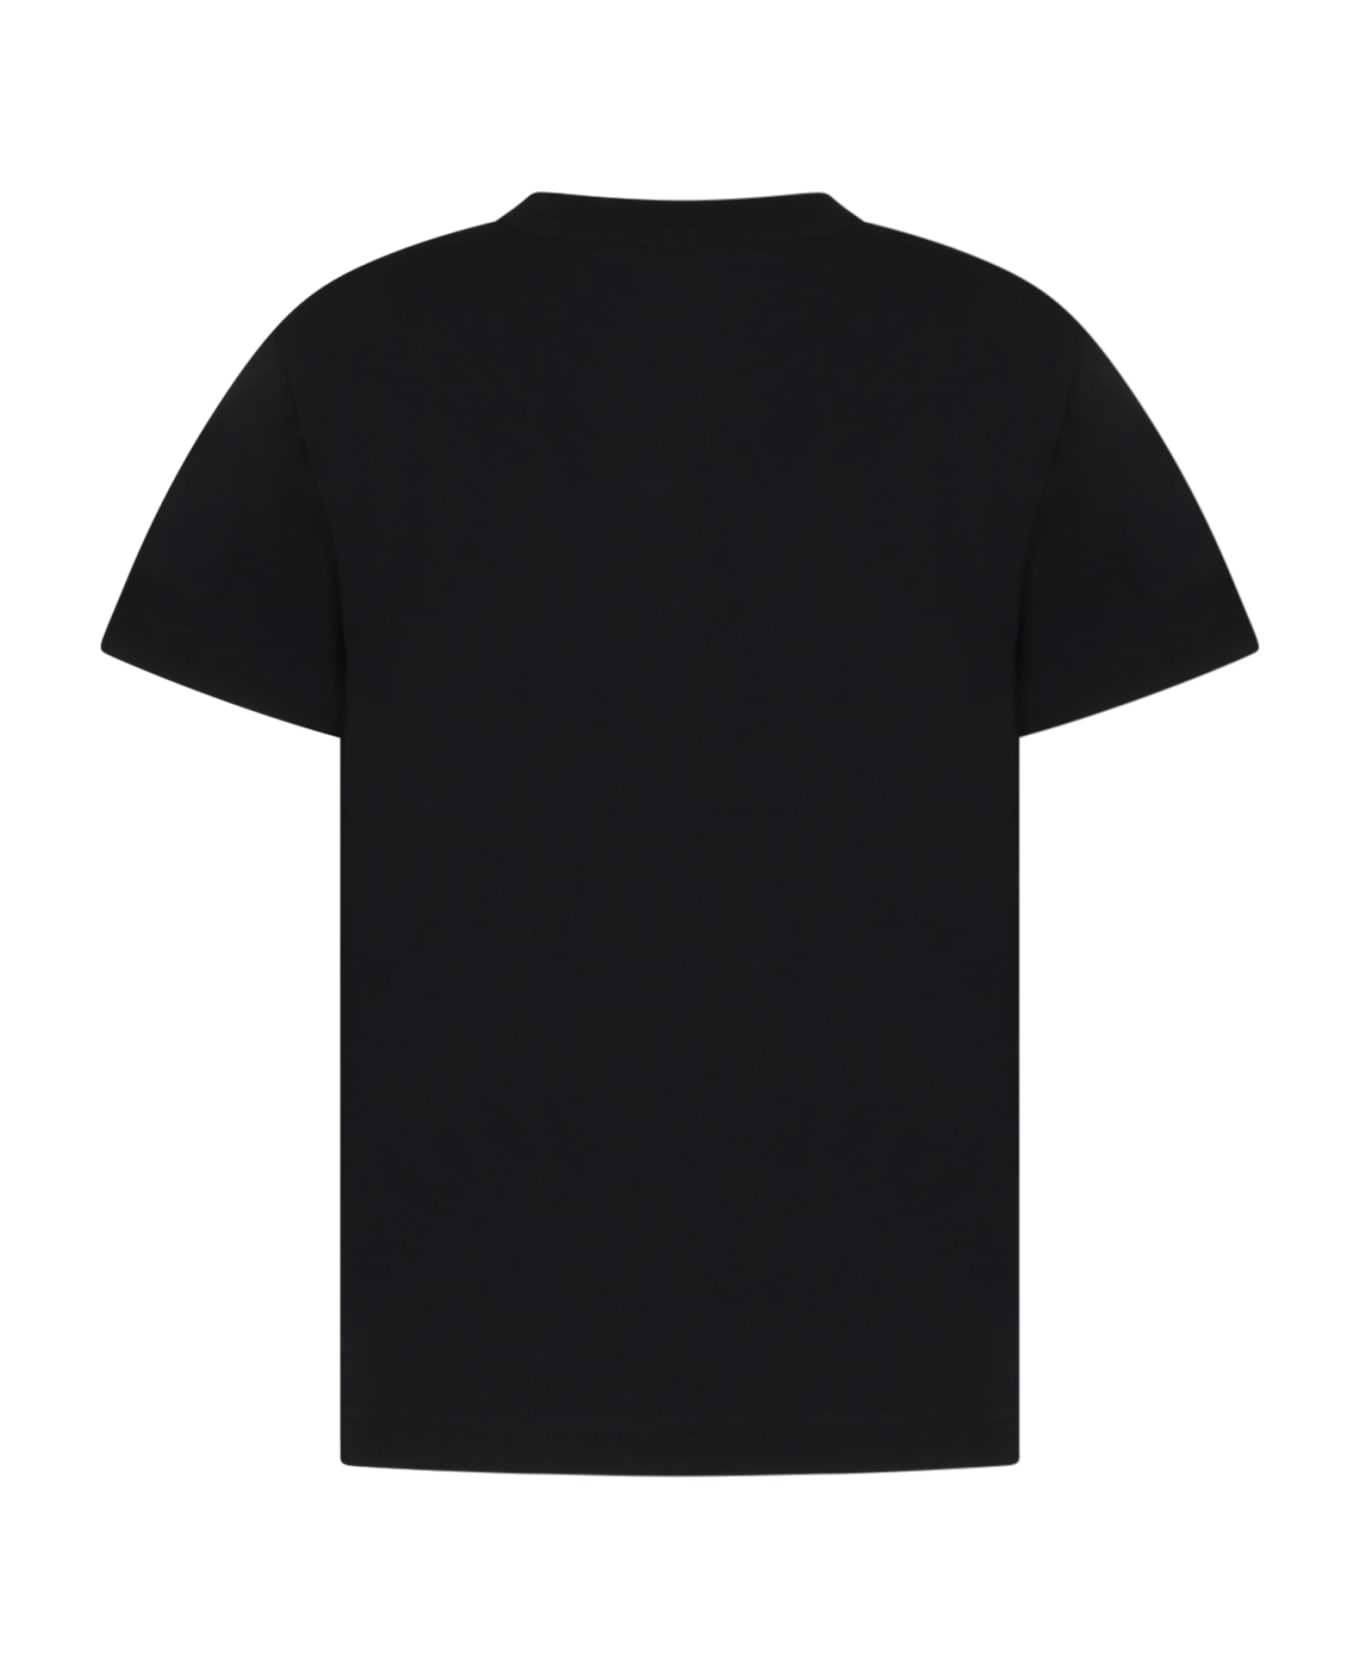 Moncler Black T-shirt For Boy With Logo Patch - Black